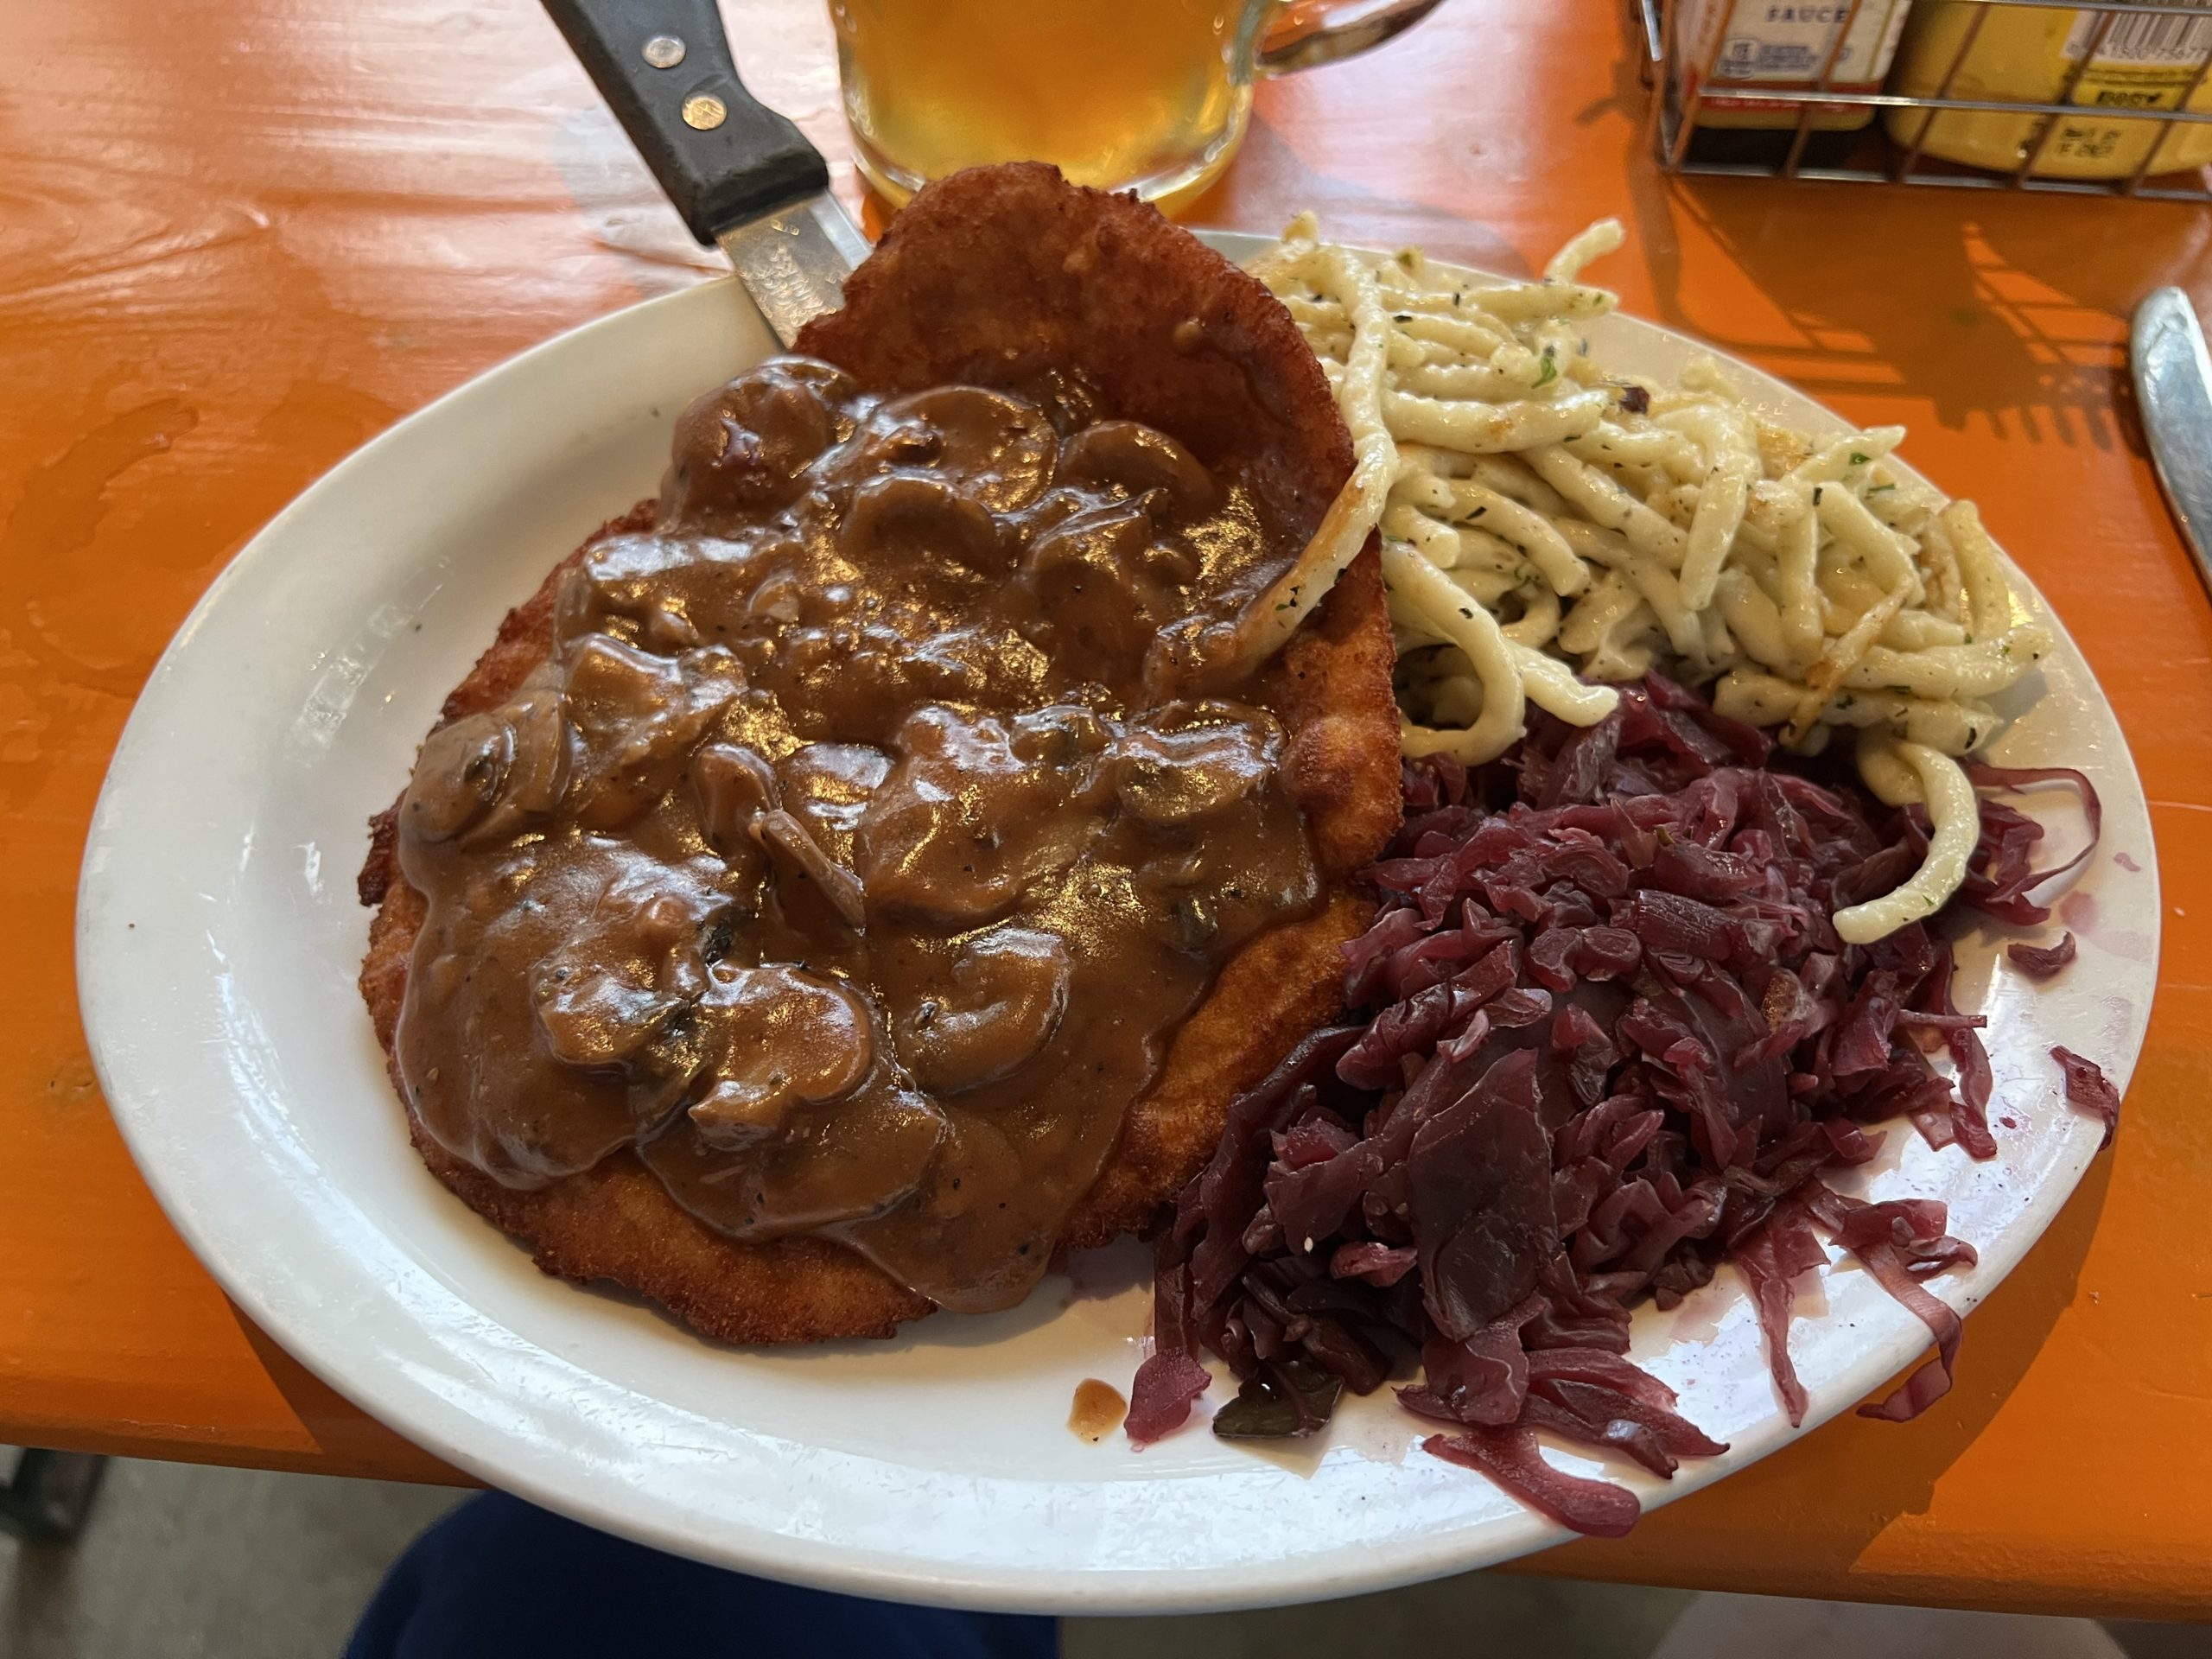 a plate of food with a fork and a glass of beer